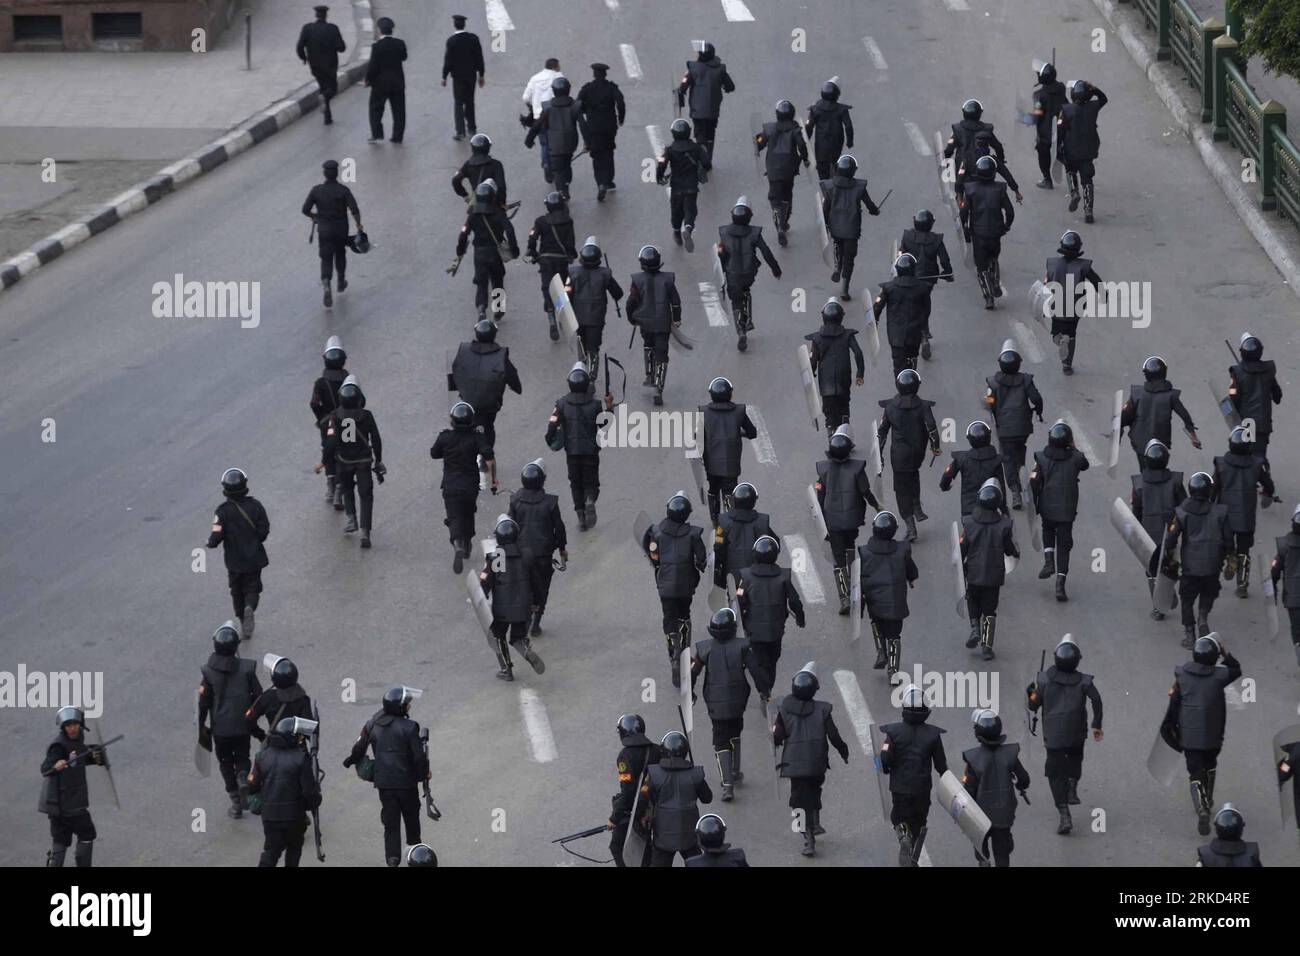 Bildnummer: 54861390  Datum: 29.01.2011  Copyright: imago/Xinhua CAIRO, Jan. 29, 2011 (Xinhua) -- Police try to control the situation during a protest on liberation square in Cairo, Egypt, Jan. 28, 2011. Mass protests against the government continued across Egypt on Friday. Internet service has been shut down in Cairo since midnight Friday as protestors are reportedly planning massive gatherings after prayers. Mobile phone communication was also disrupted on Friday morning. (Xinhua/Cai Yang)(xhn) EGYPT-CAIRO-PROTEST PUBLICATIONxNOTxINxCHN Gesellschaft Politik Unruhen Aufstand Ausschreitungen k Stock Photo